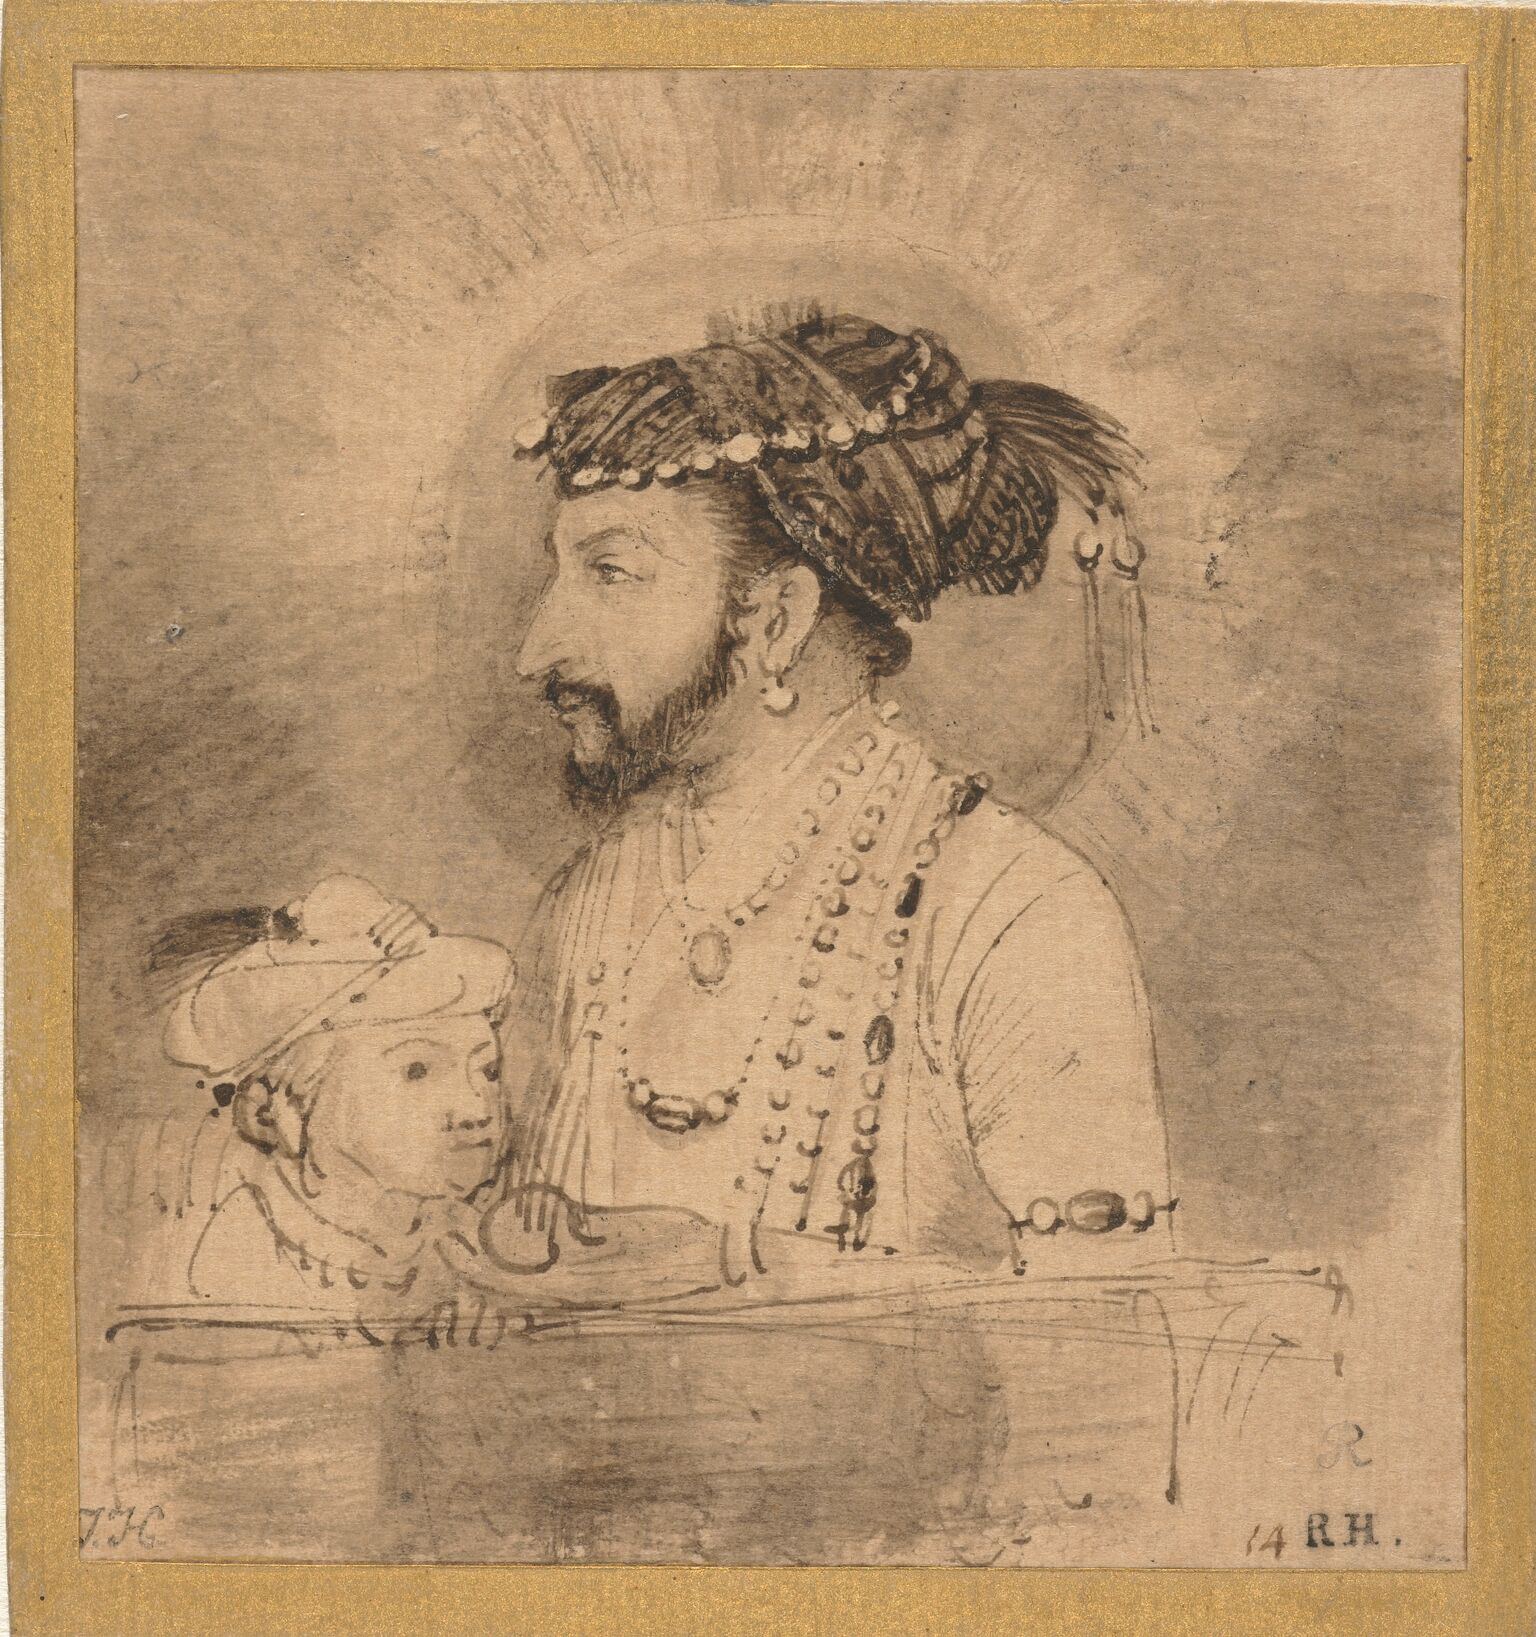 Shah Jahan and his Son. Drawings by Rembrandt and his School c. 1656 - 1658, Rijksmuseum Amsterdam 2017, online coll. cat.